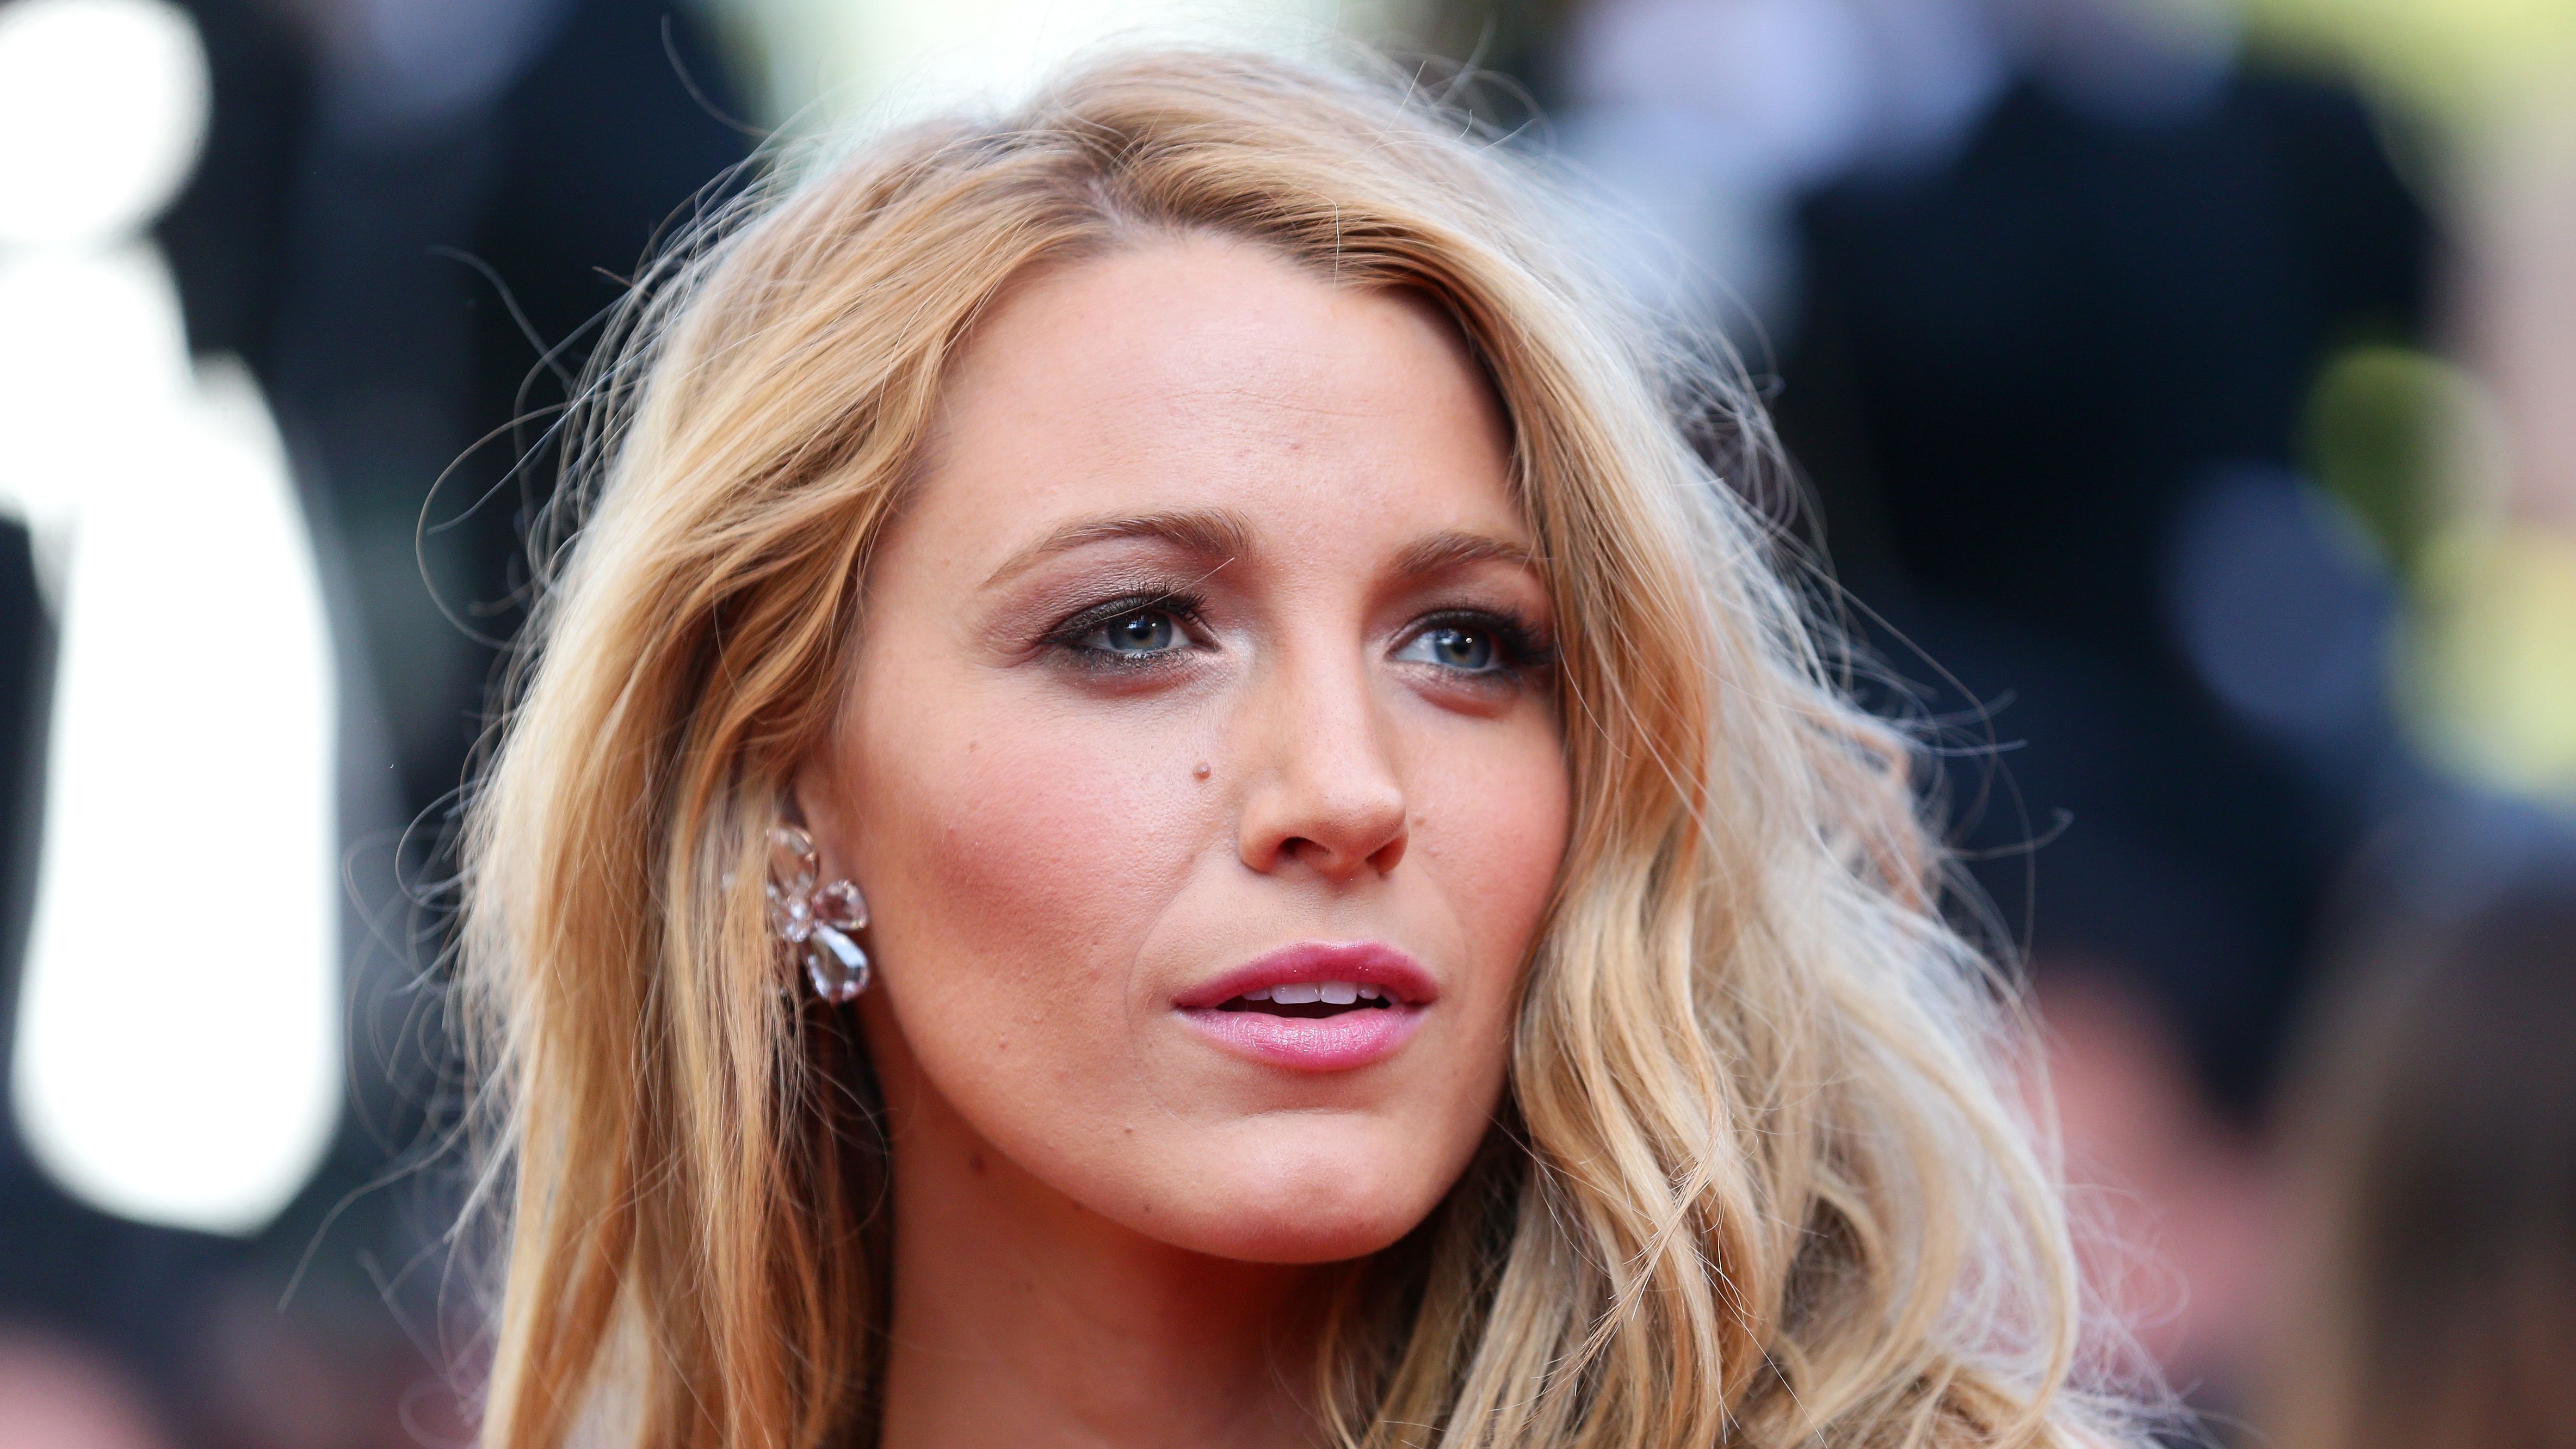 Blake Lively Threesome Porn - Blake Lively Is Not OK With Photos of Her Kids Being Shared | Marie Claire